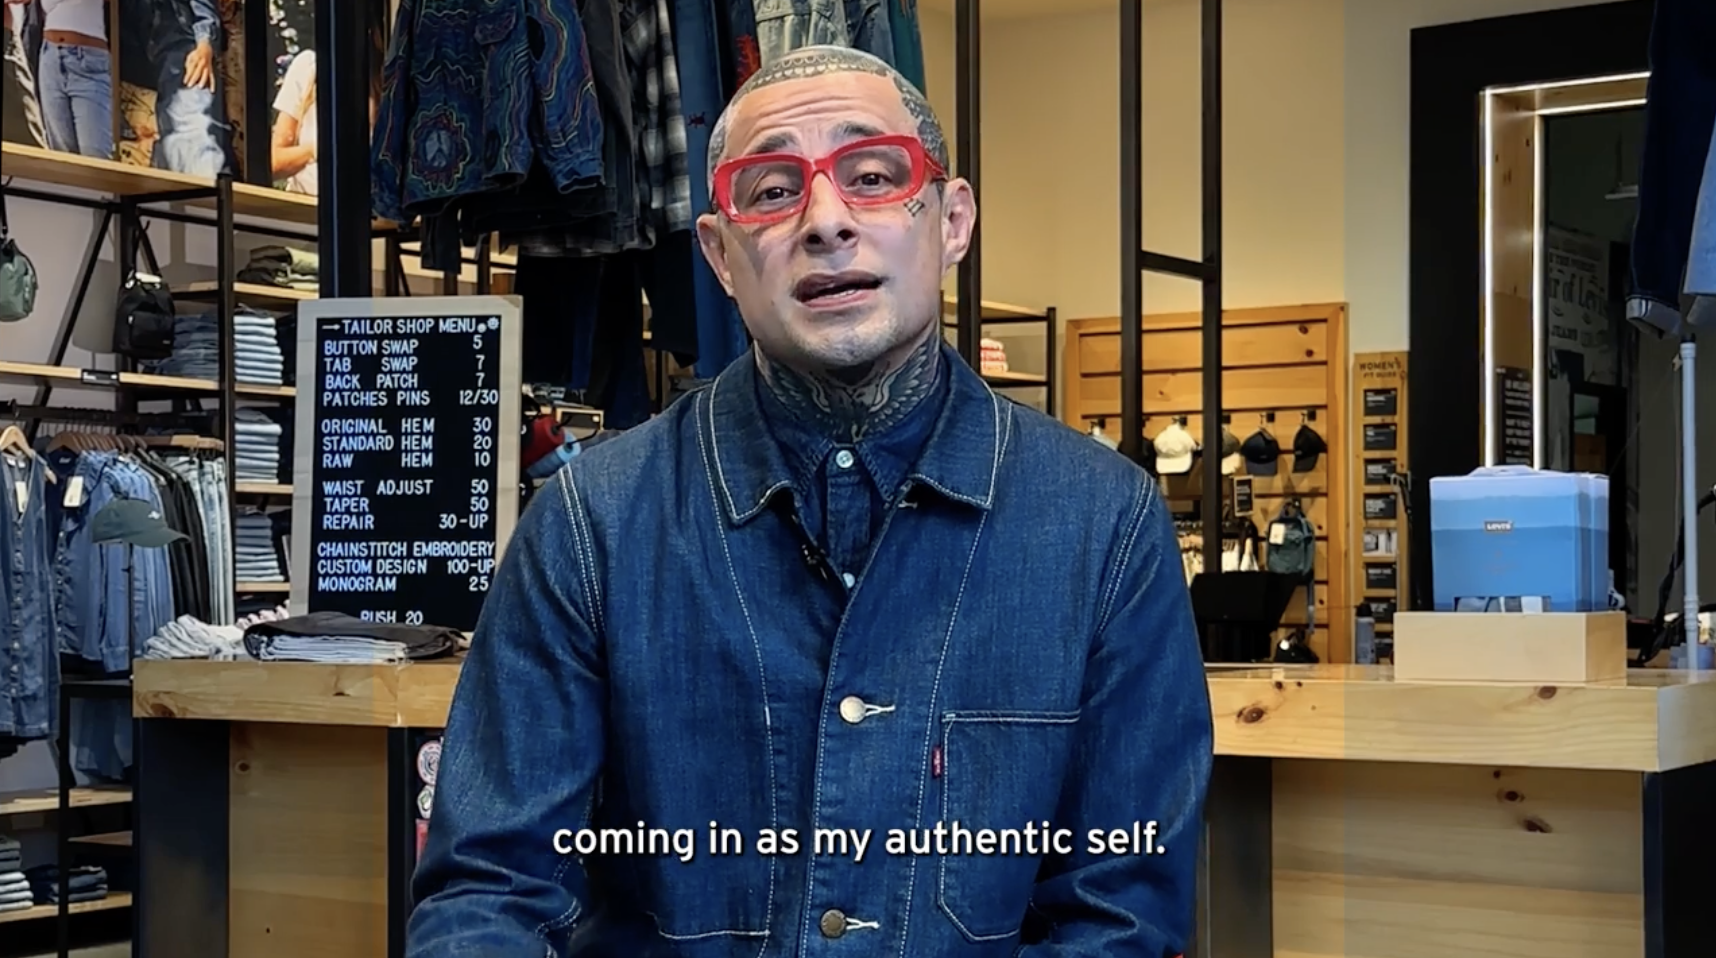 Levi's® Century City Store Manager Angel Mendoza sits in the Levi's® Tailor Shop. He is wearing red rimmed glasses and a Levi's® blue denim top. A subtitle appears on the bottom of the image in white text 